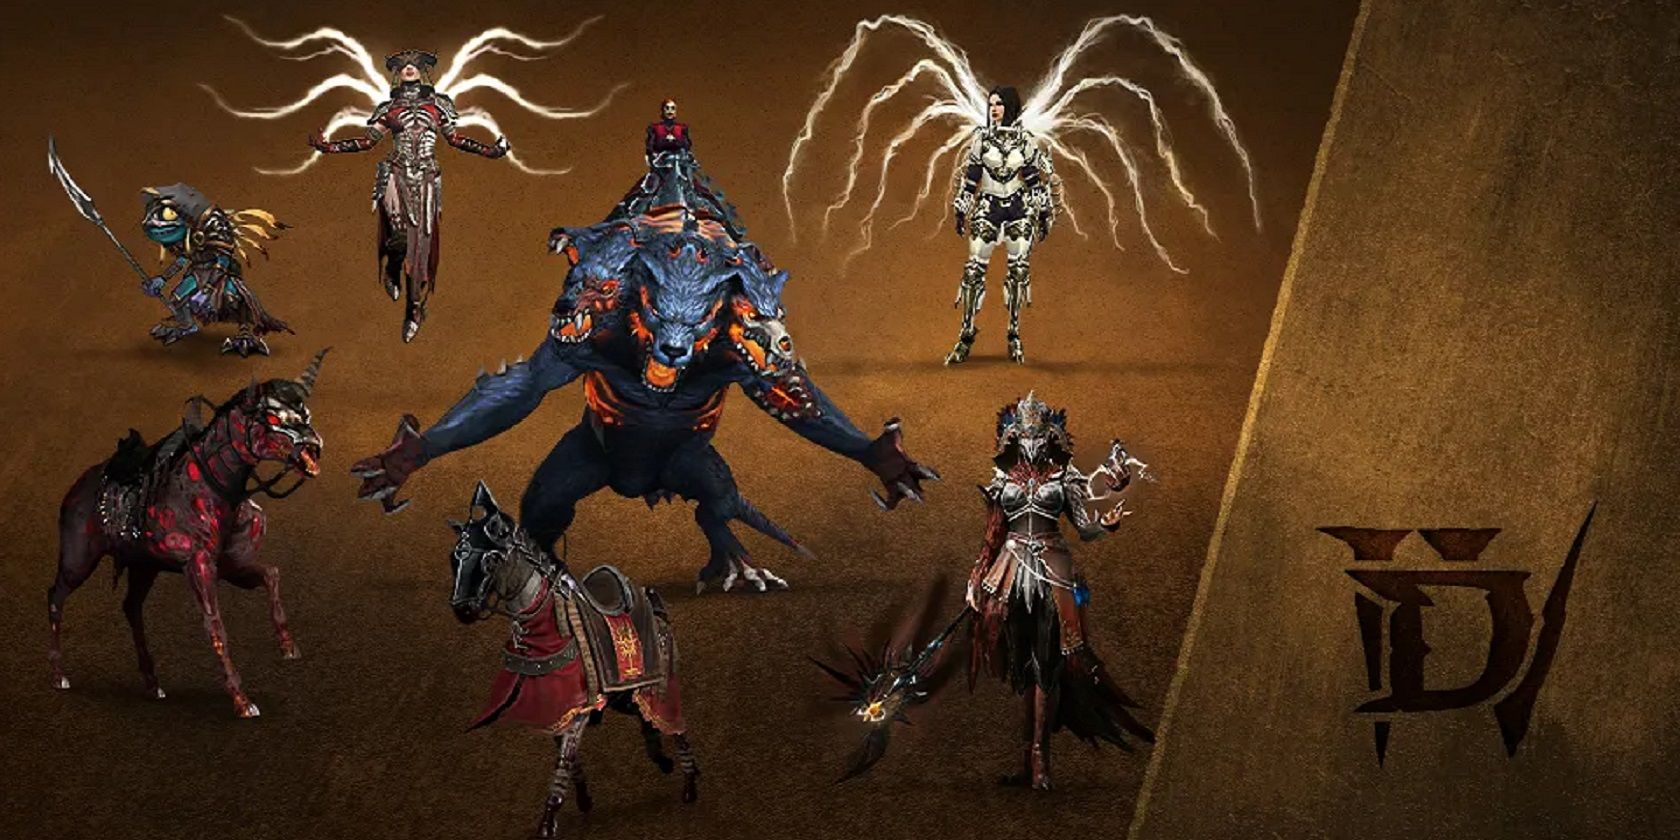 An image of the digital items that players will receive for pre-ordering the Ultimate Edition of Diablo 4